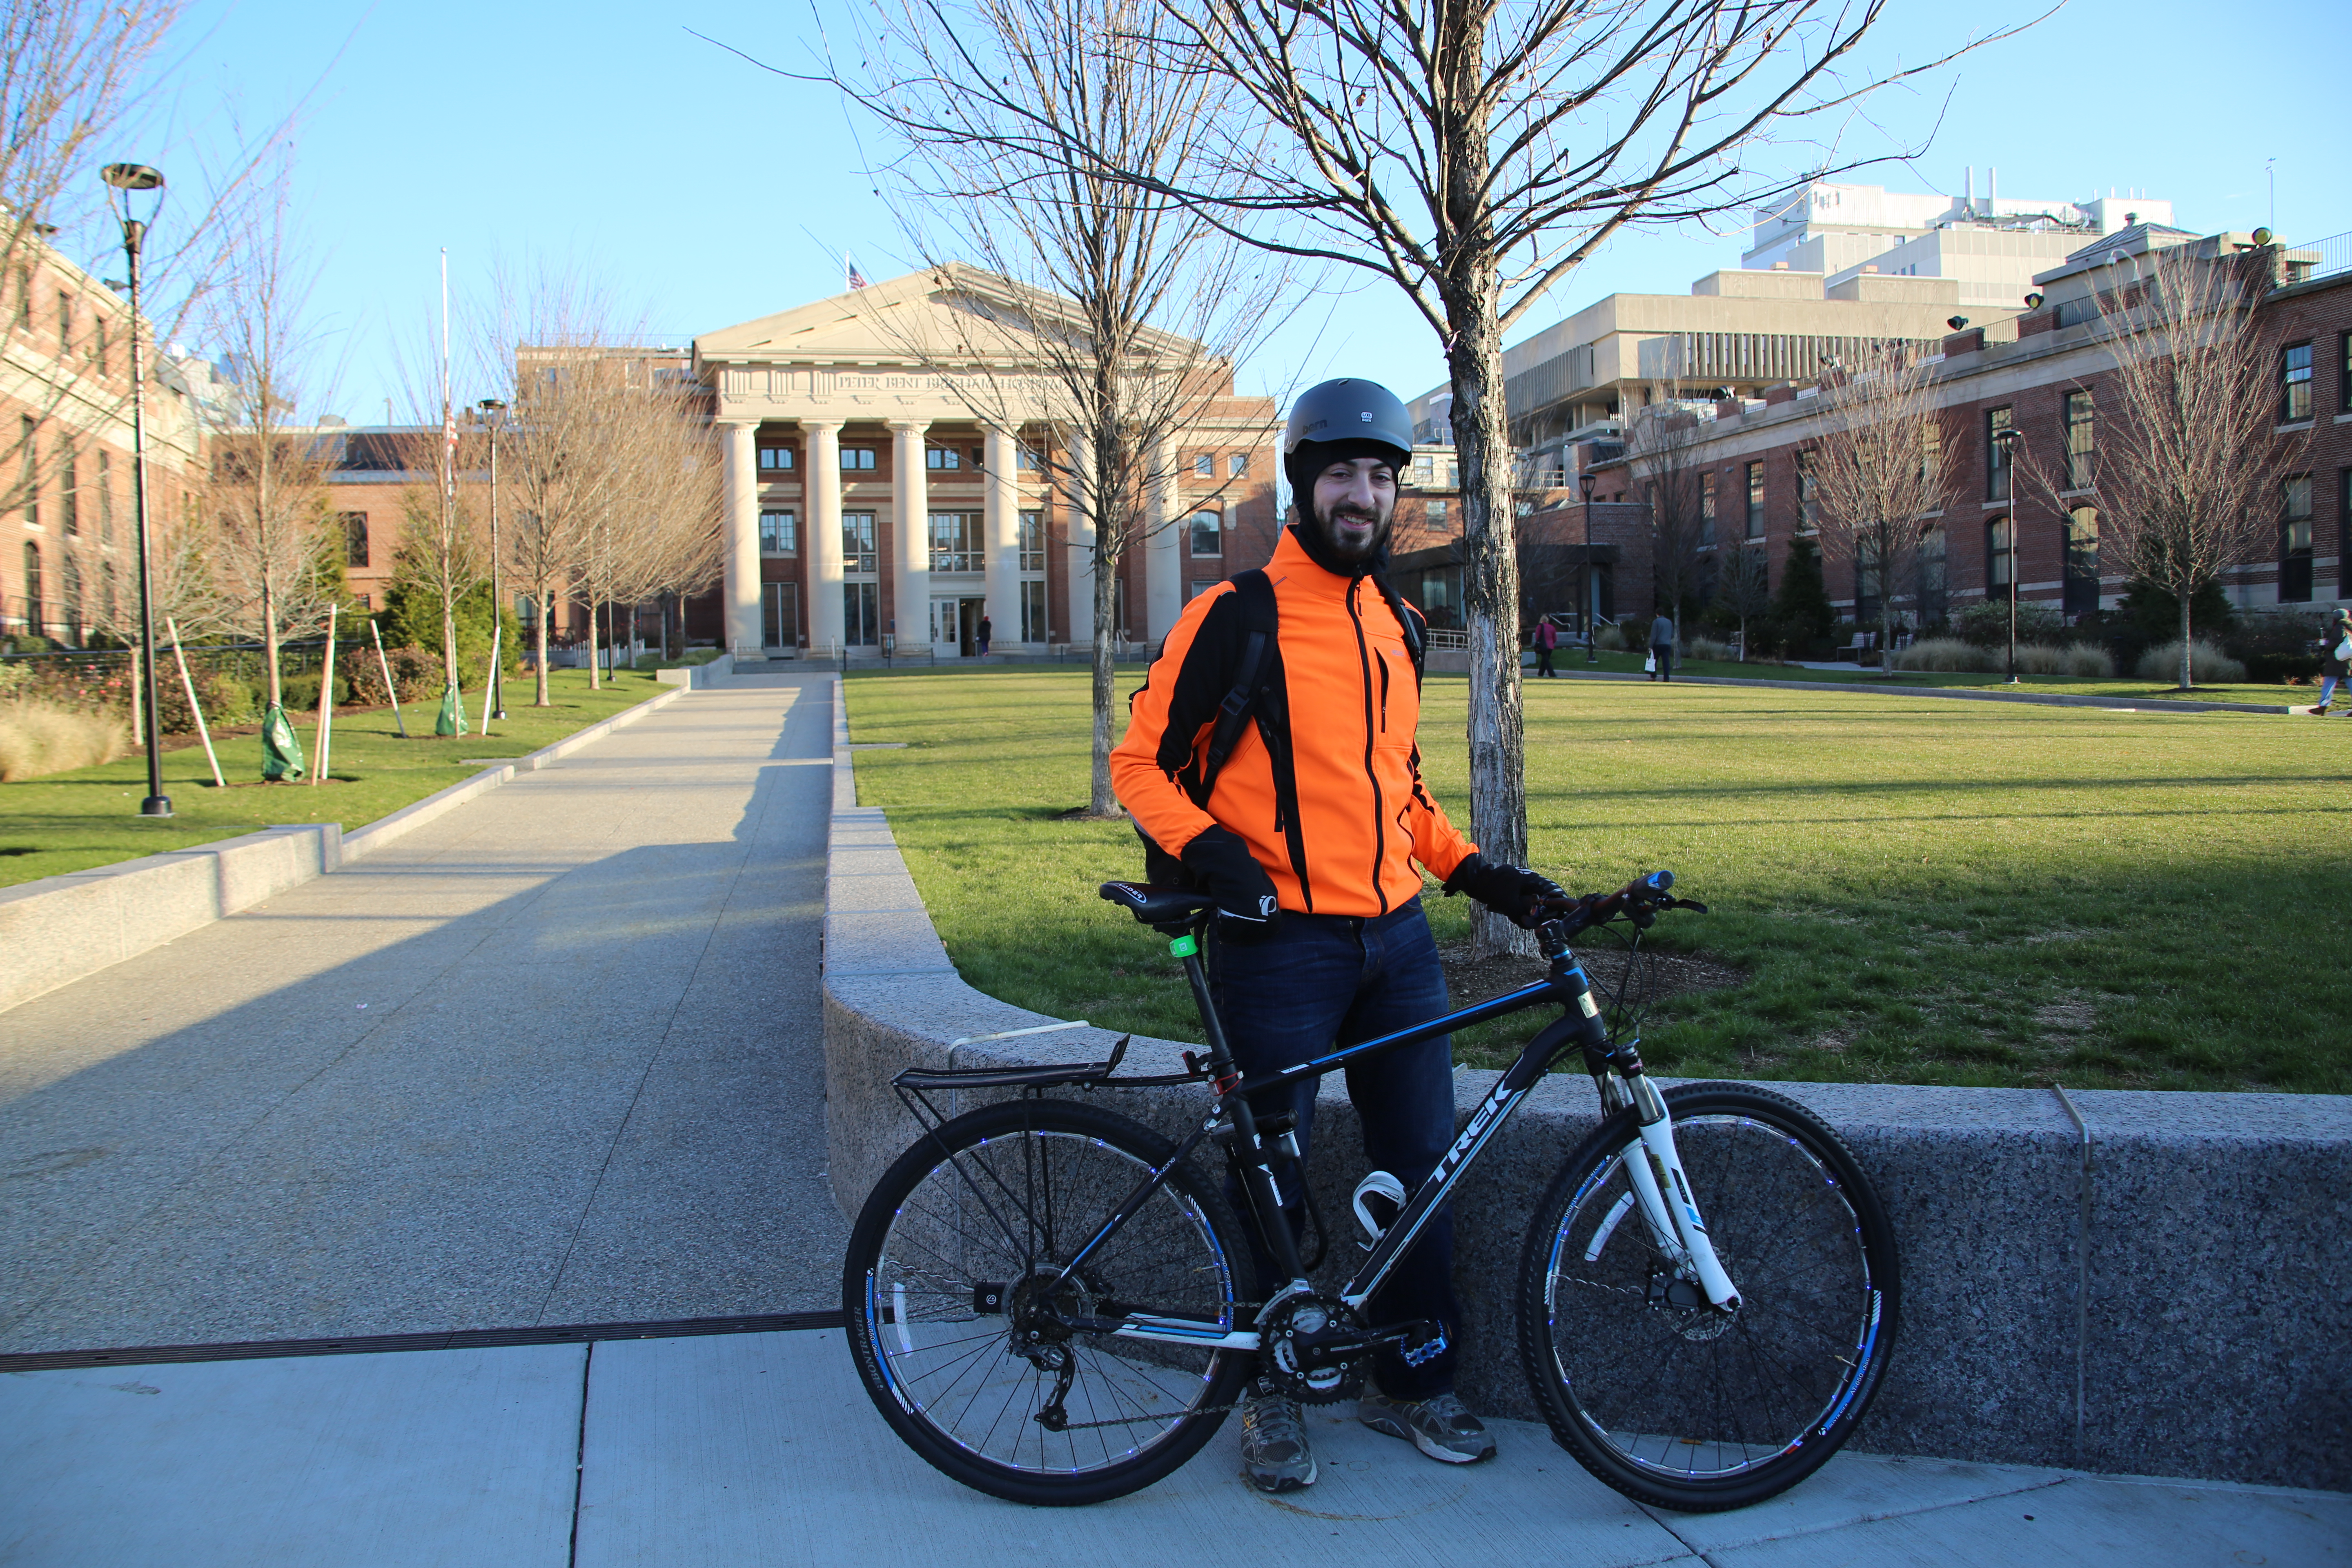 Alexander Frieden launched CarsInBikeLanes Boston as a result of his experiences commuting to Longwood as a cyclist.